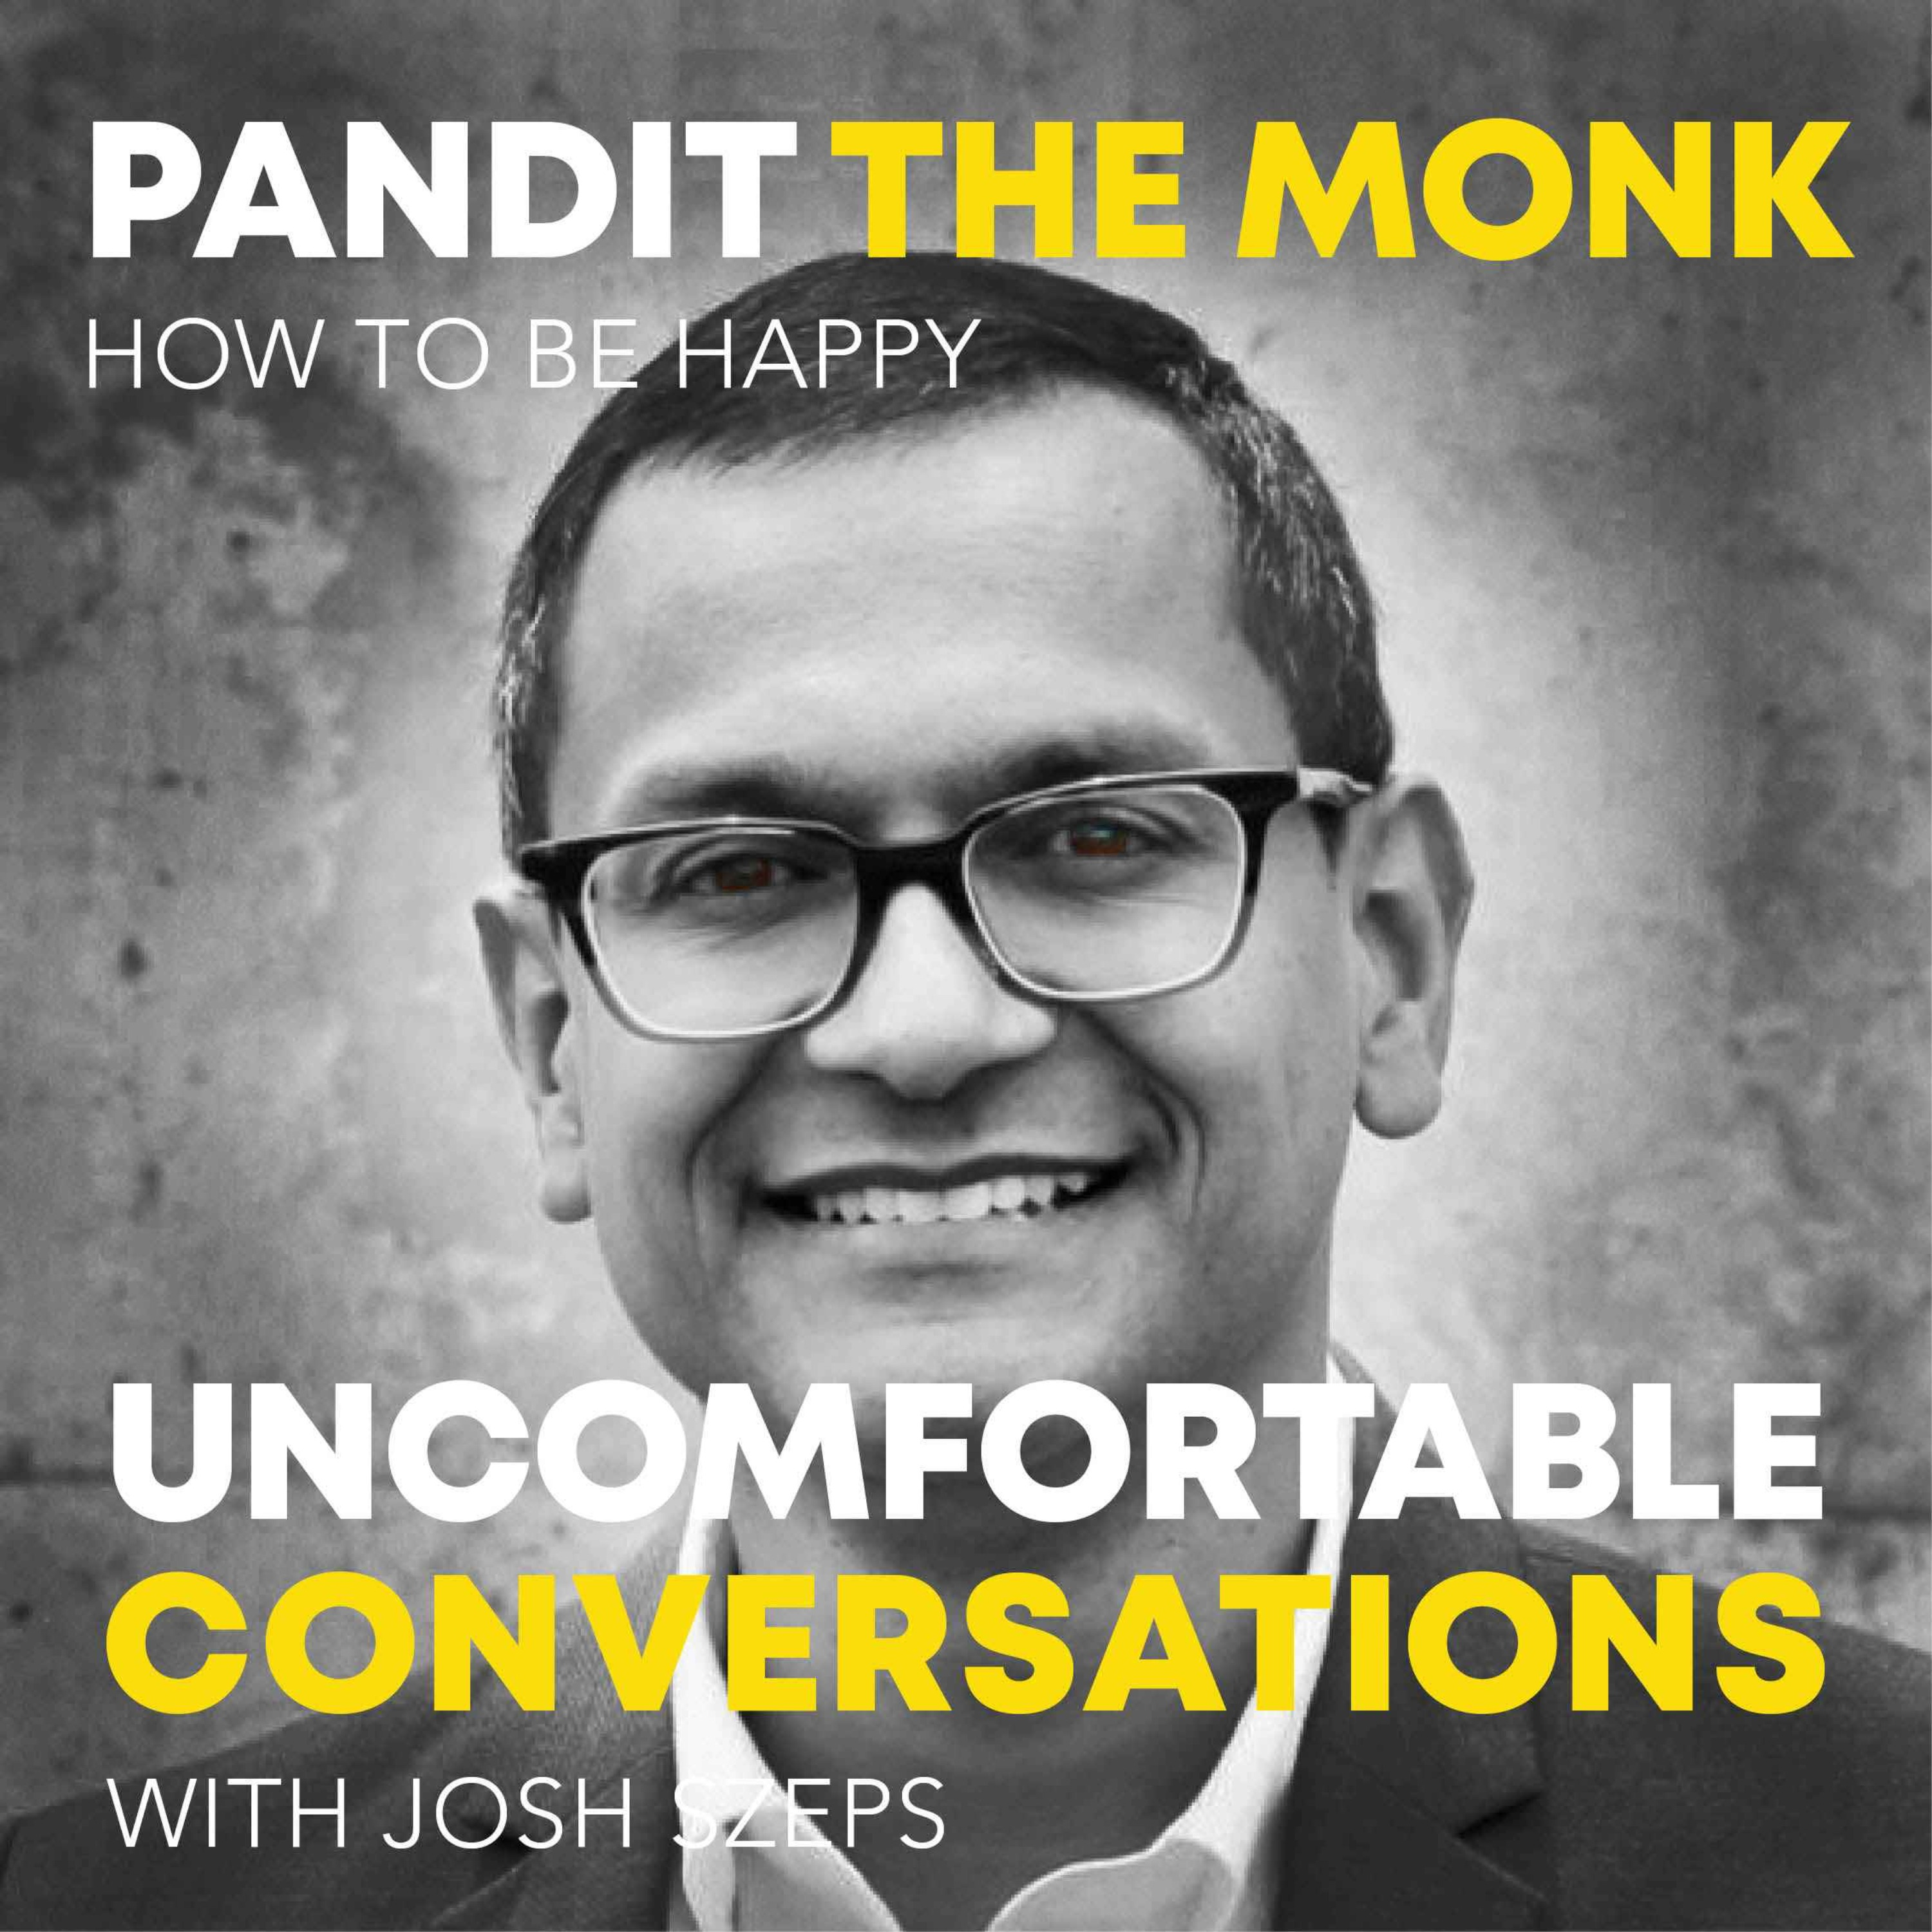 "How To Be Happy" with Pandit The Monk